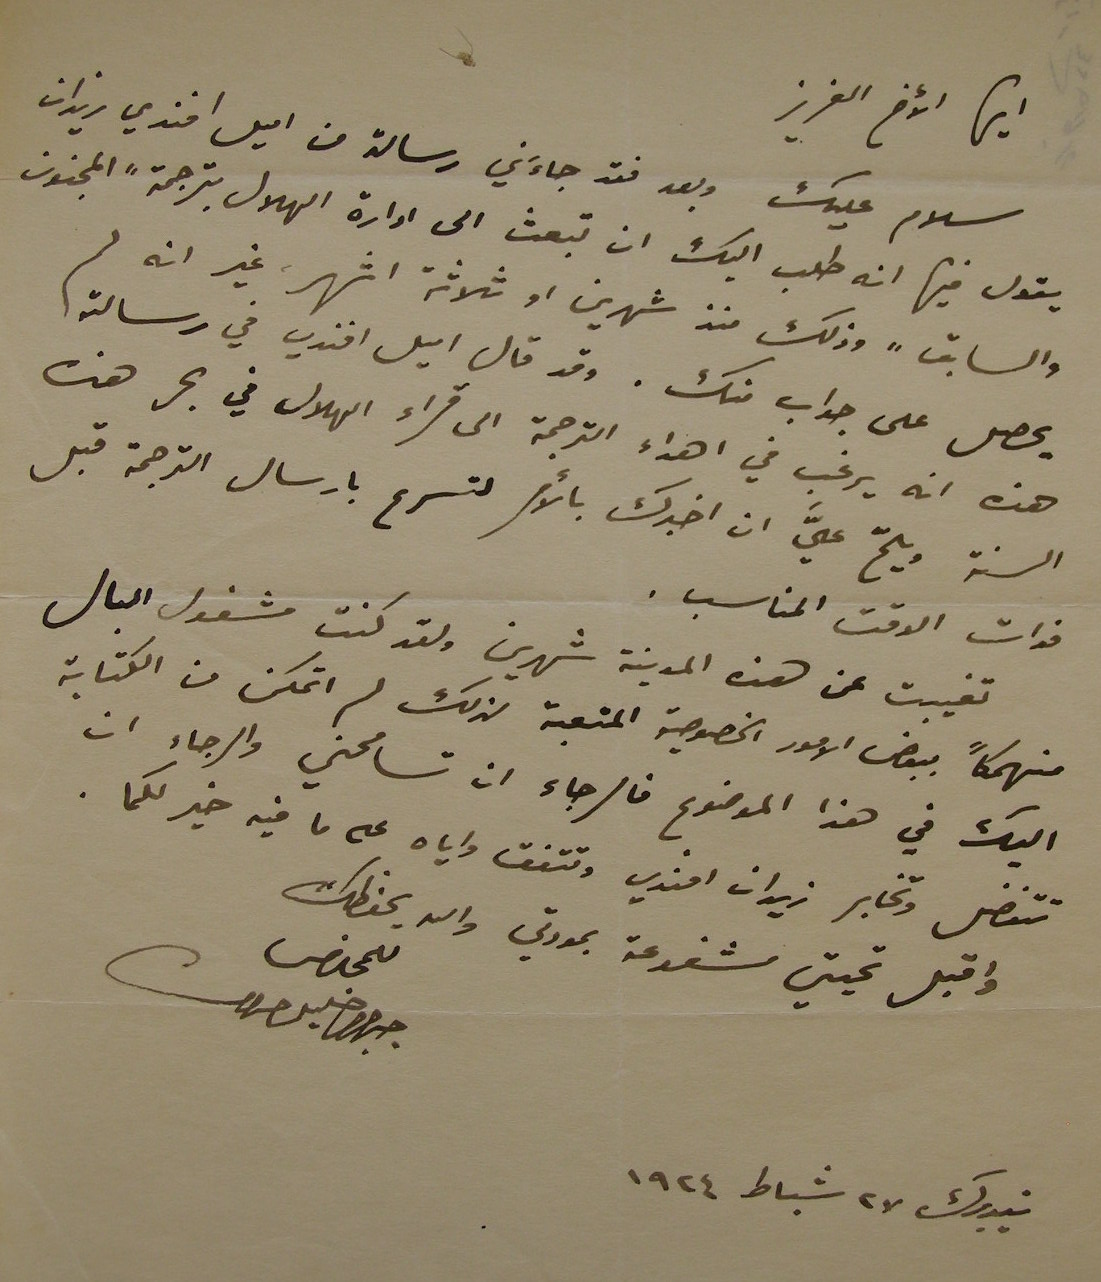 A Letter from Gibran to Bashir 